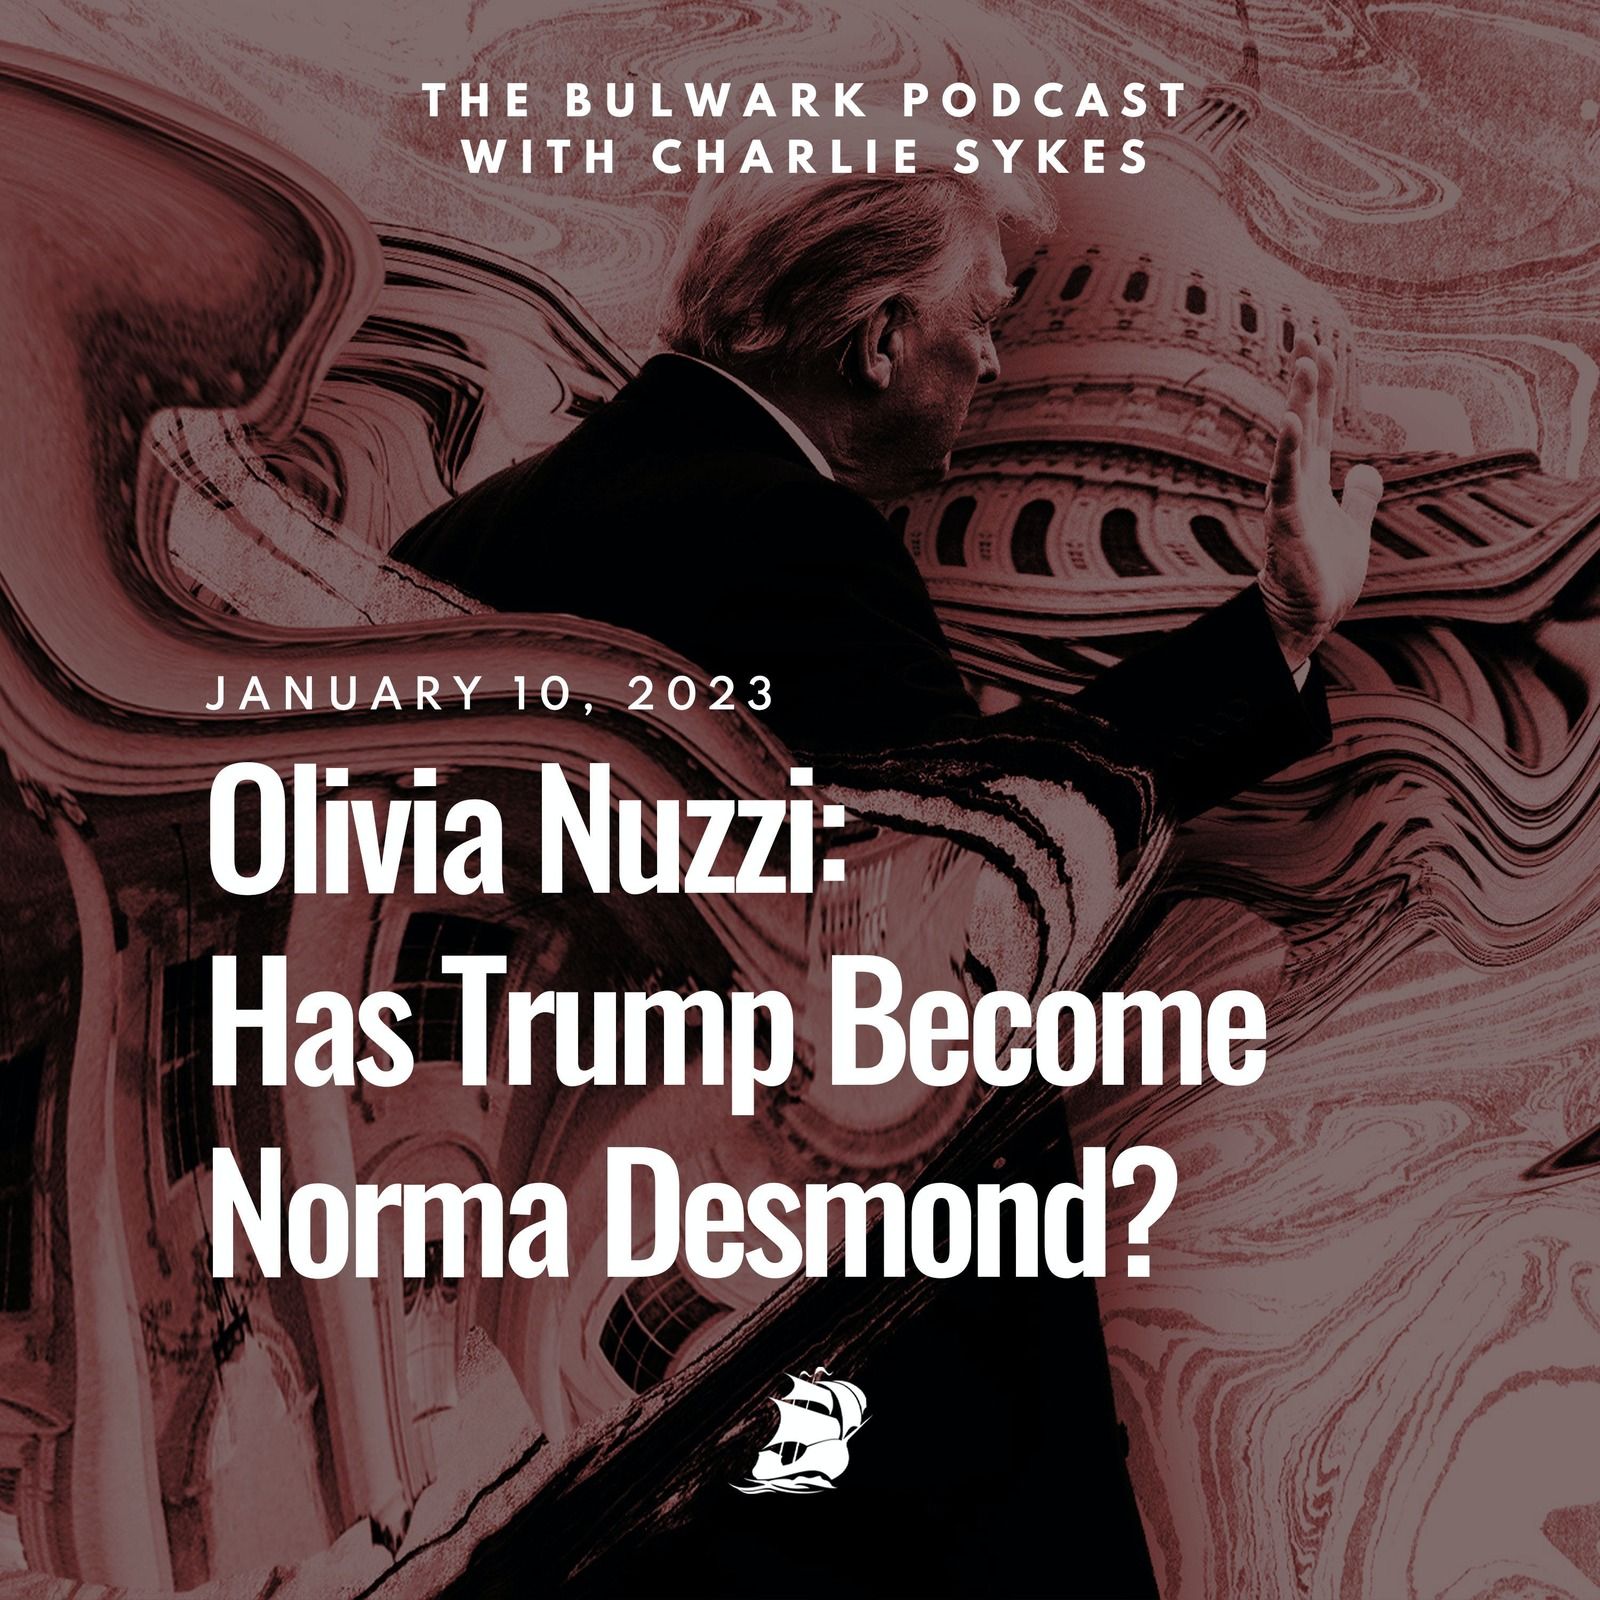 Olivia Nuzzi: Has Trump Become Norma Desmond? by The Bulwark Podcast